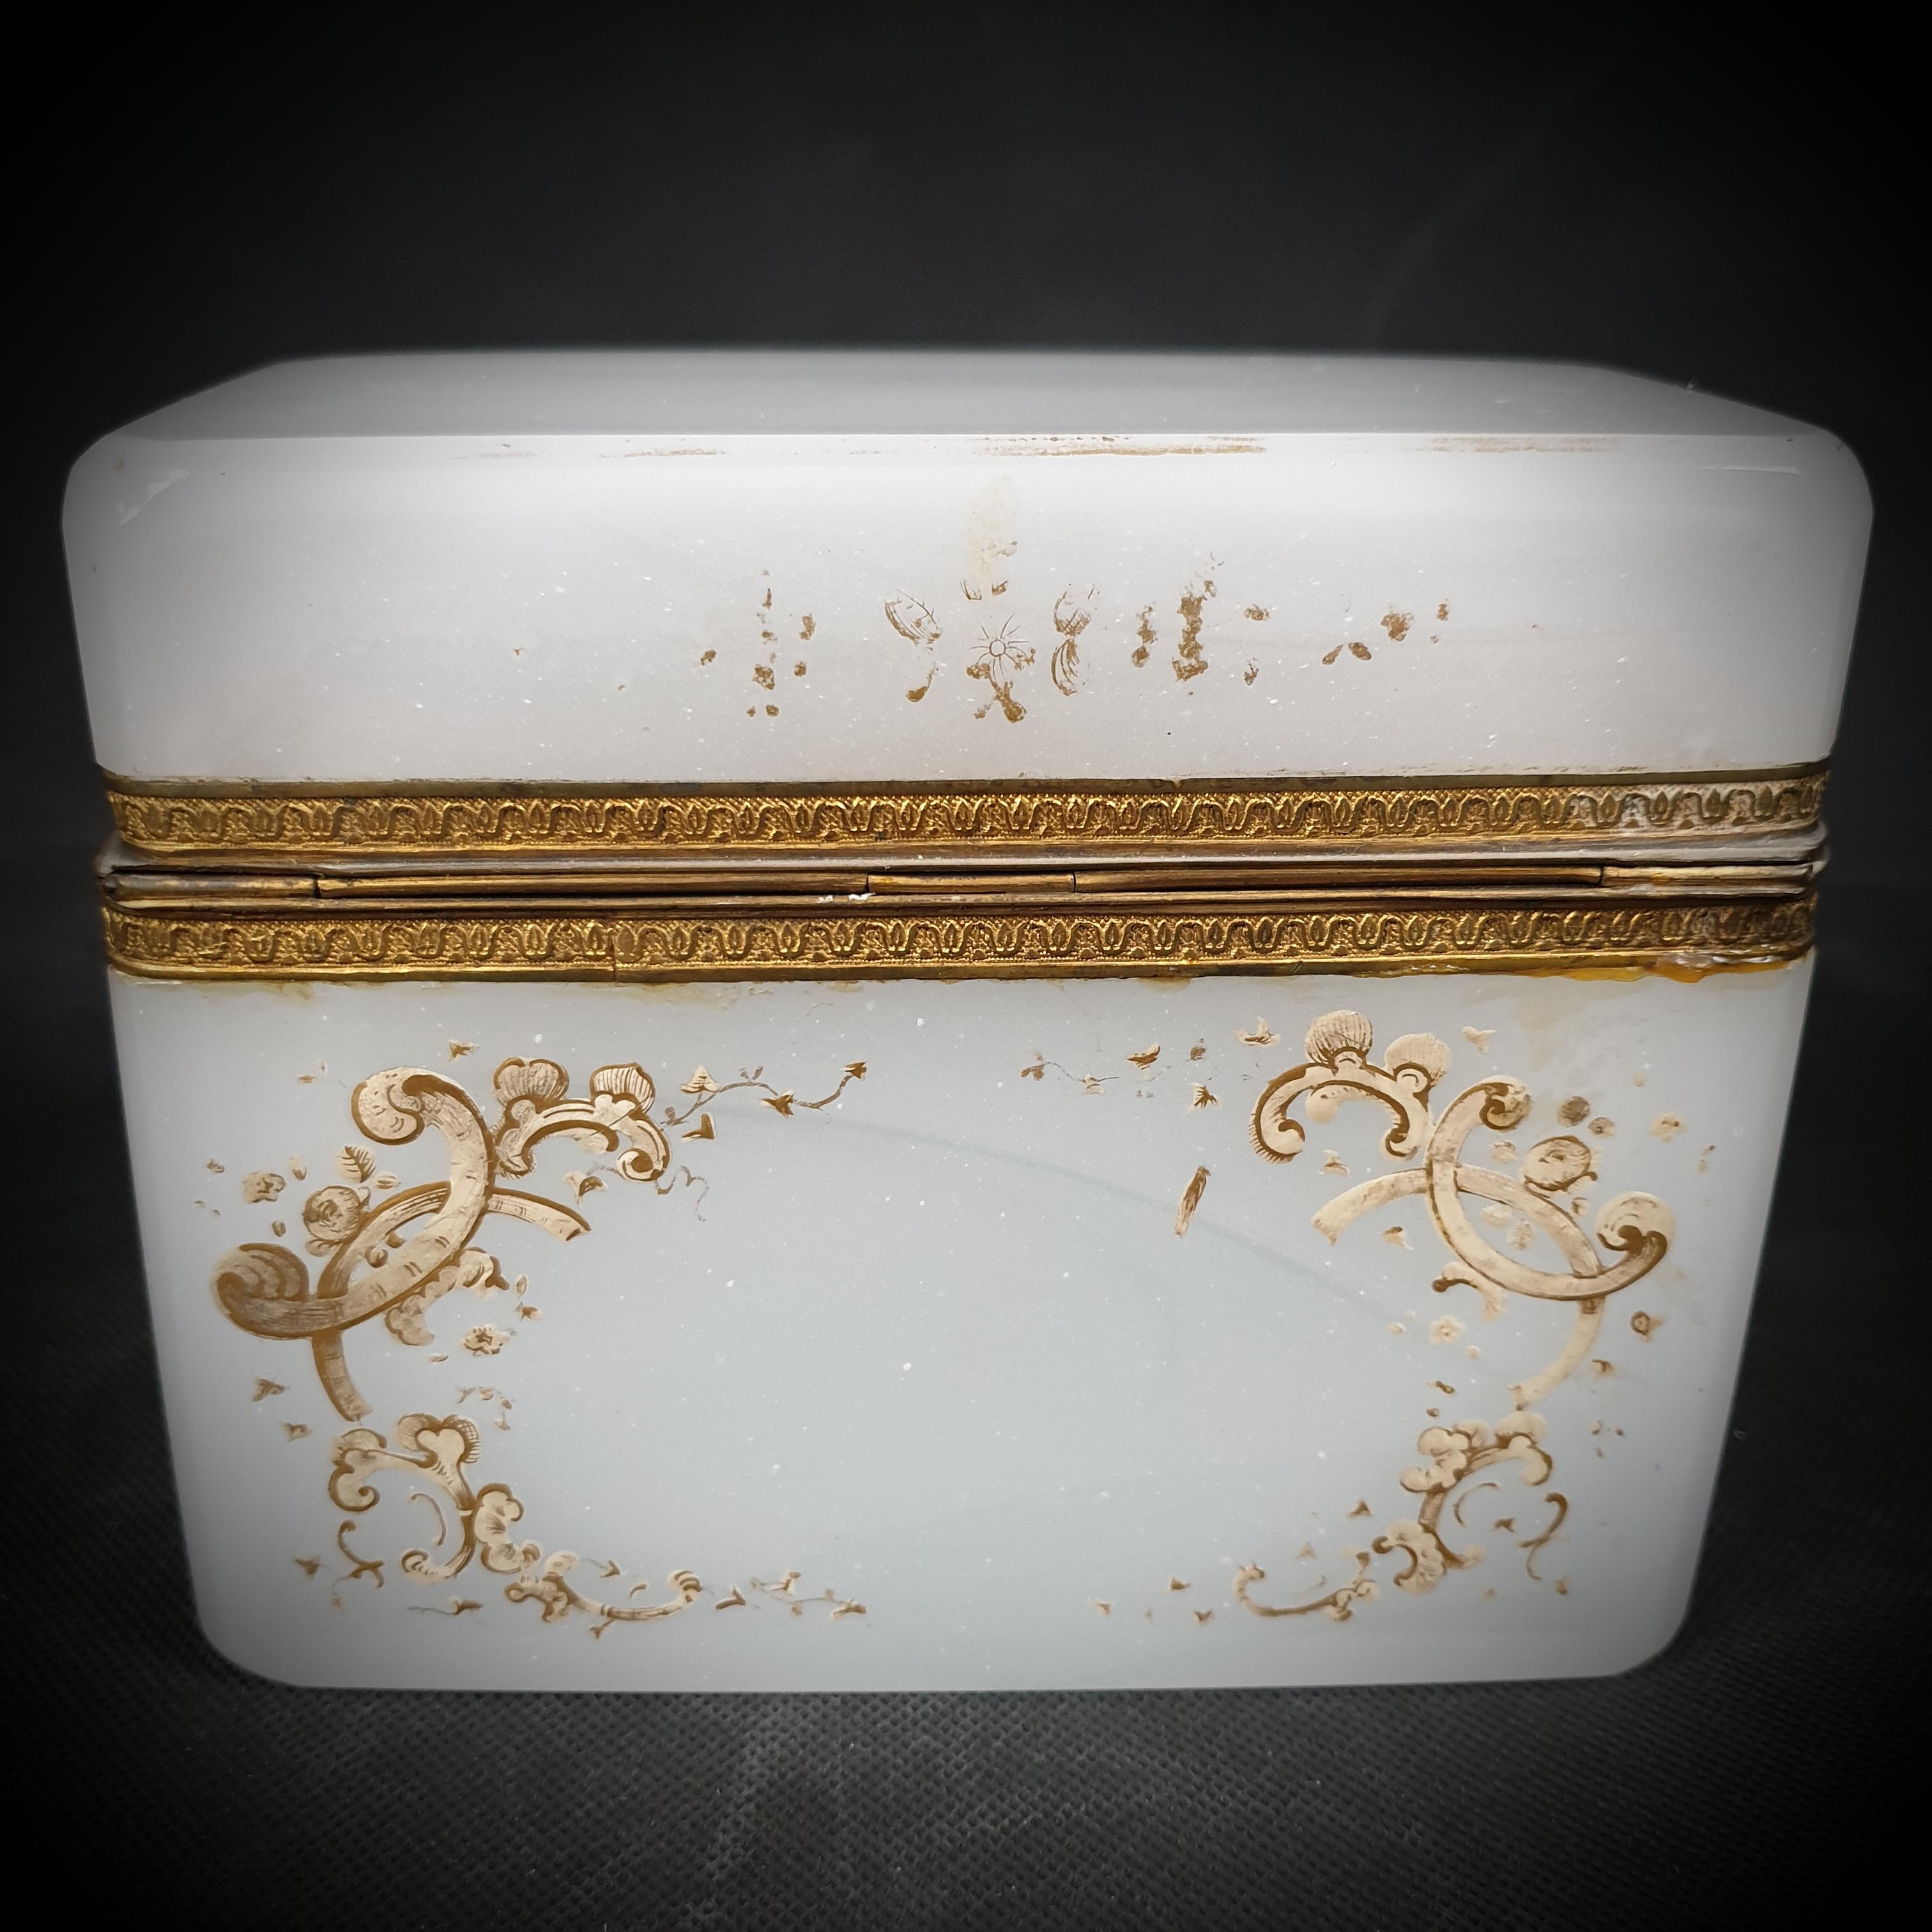 This antique Bohemian opaline glass box is a work of art that has withstood the test of time. Because of the beautiful gold gilding that covers all four sides, this exquisite piece of milky white glass is a treasure for collectors and art lovers.